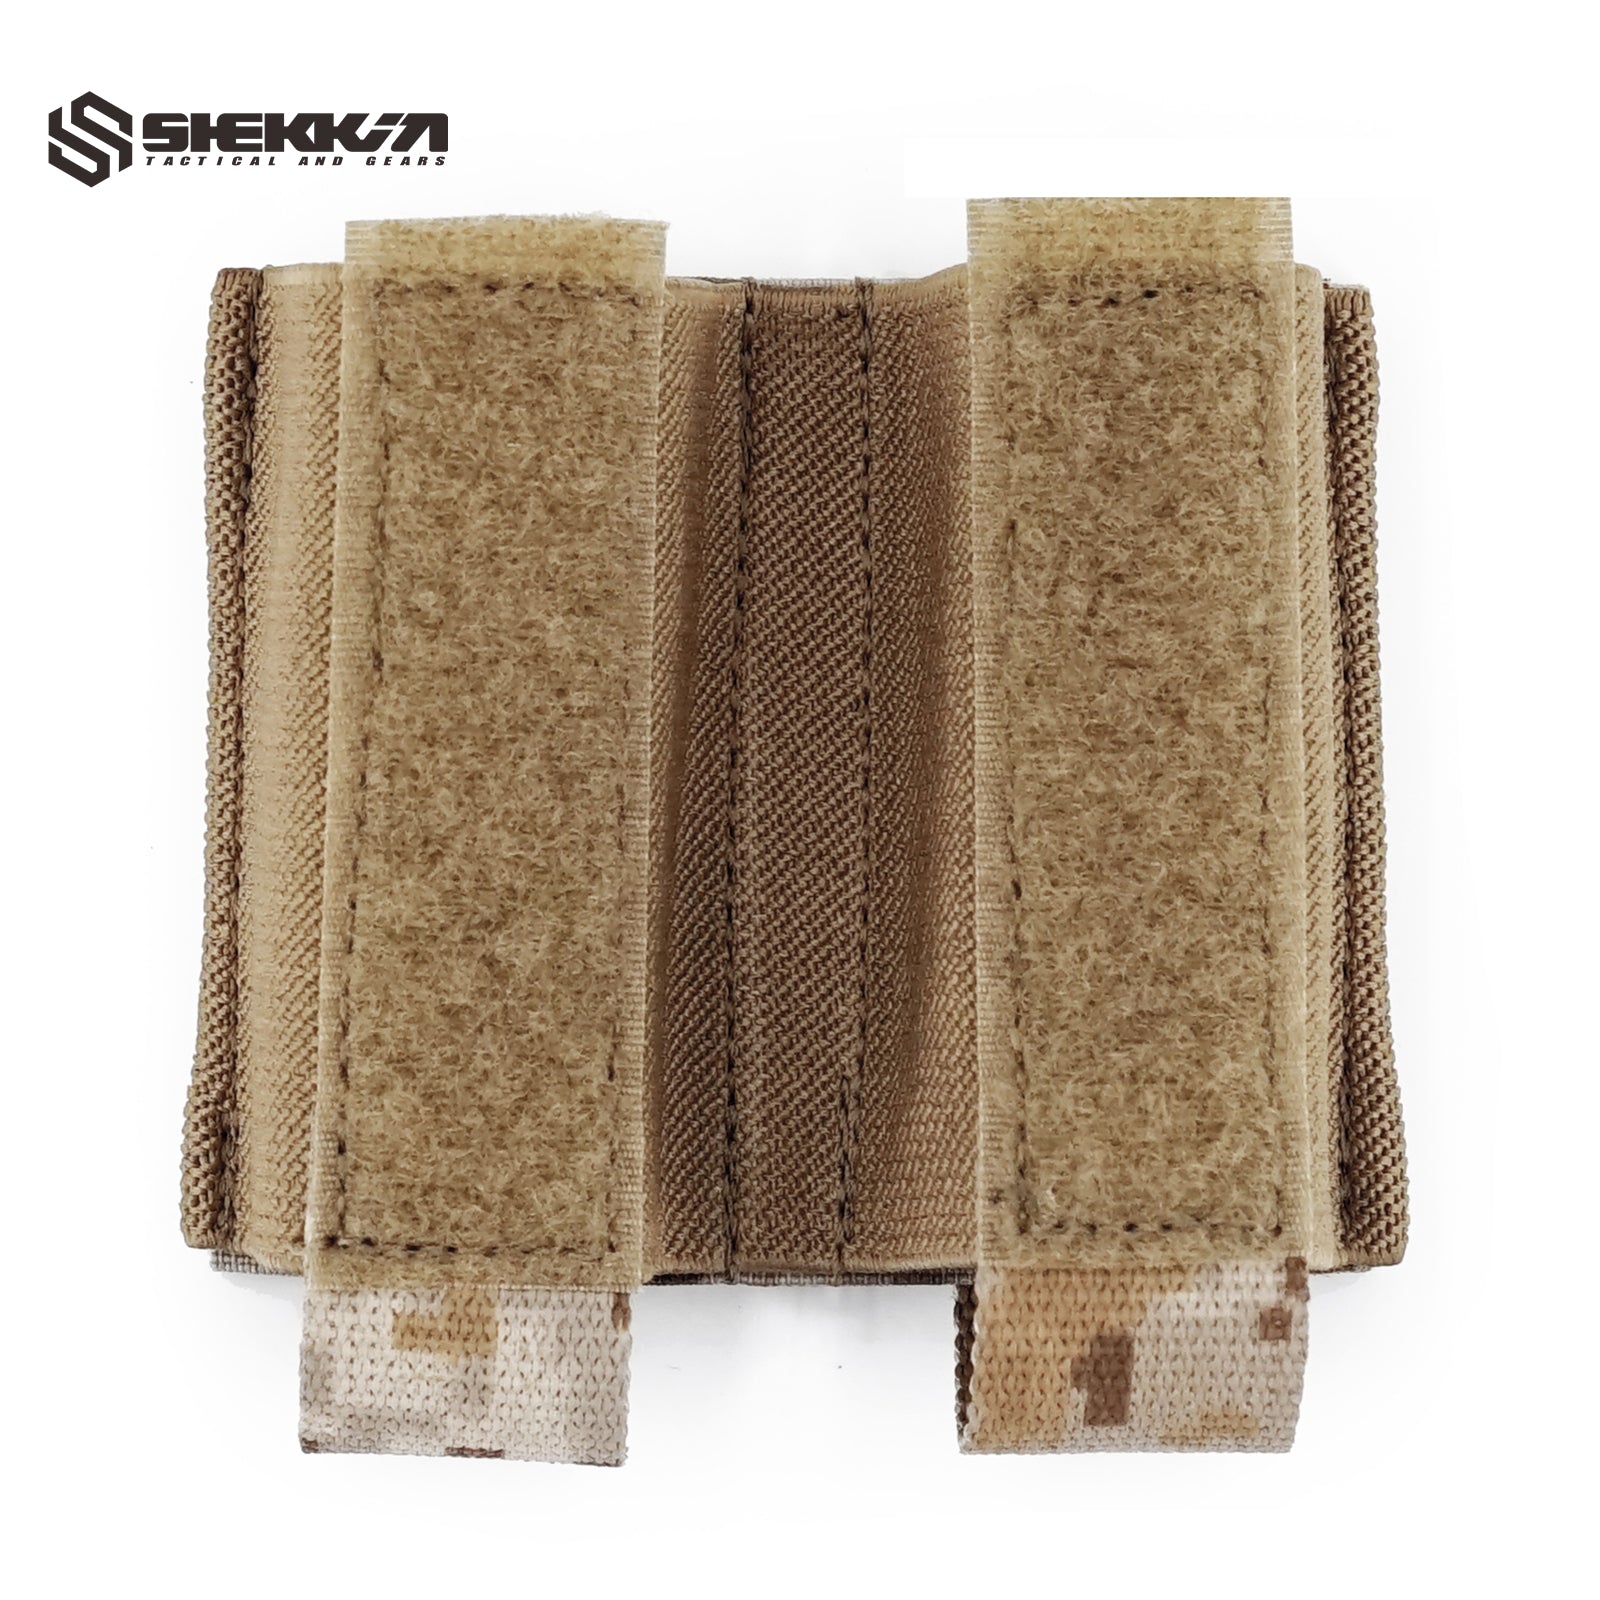 Double 9mm mag pouch for Kangaroo flap